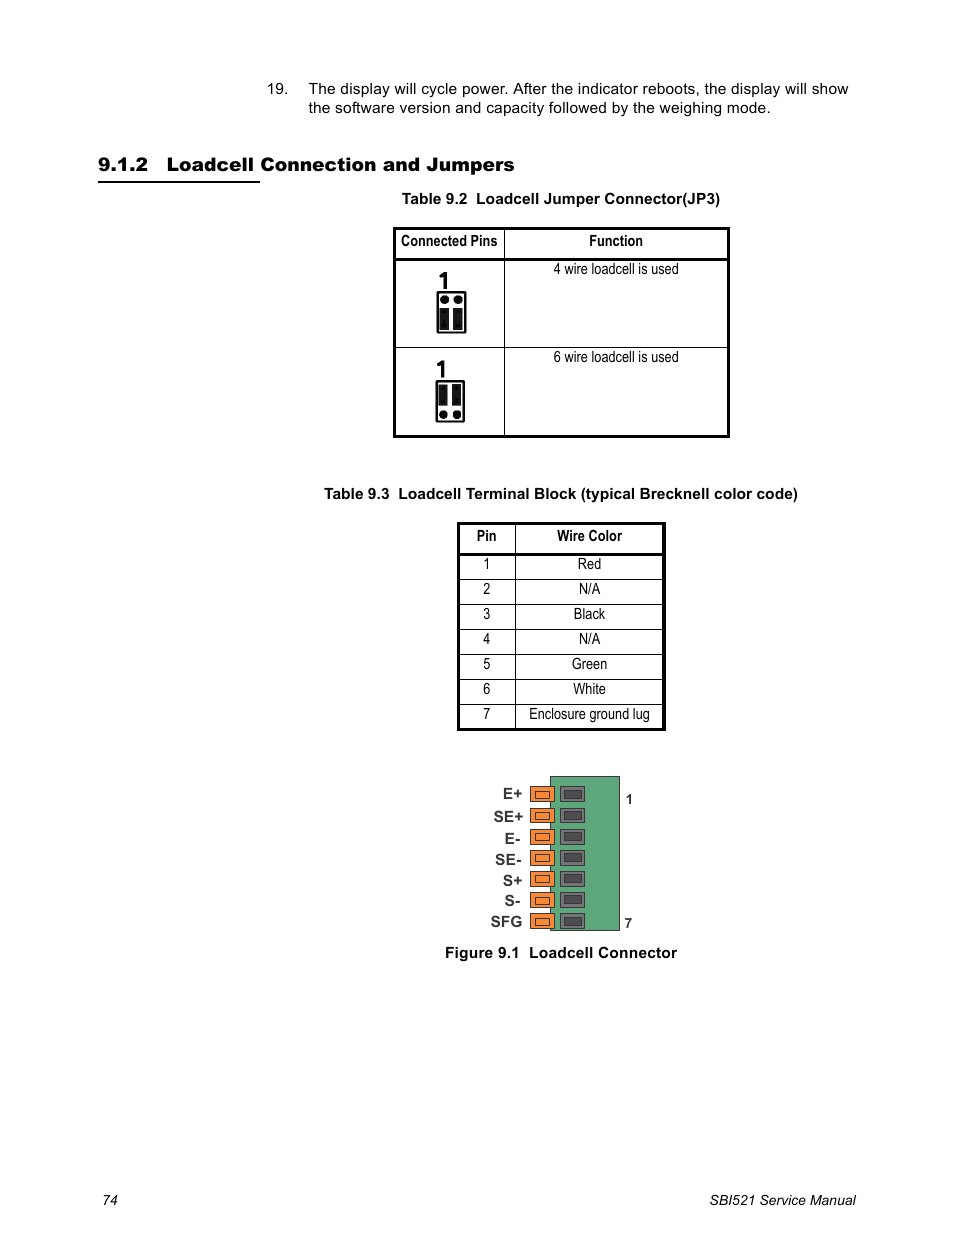 2 loadcell connection and jumpers loadcell connection and jumpers salter brecknell wb 521 series user manual page 76 82